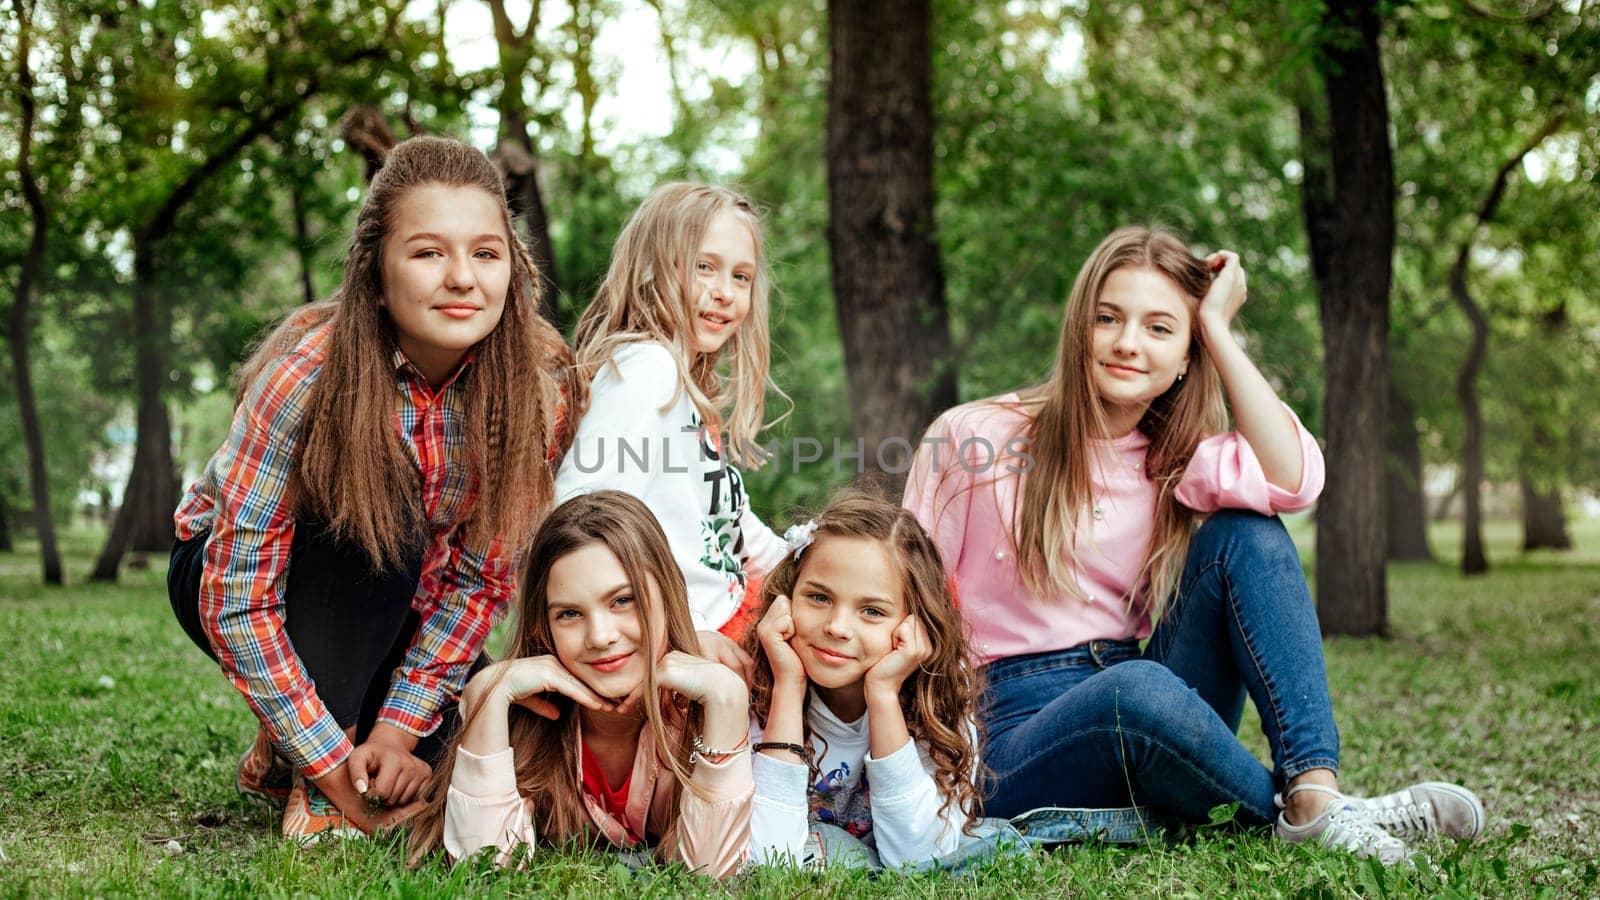 A group of girls' children pose on the lawn in the park. Yaremche, Bukovel, Ukraine - January 10, 2022